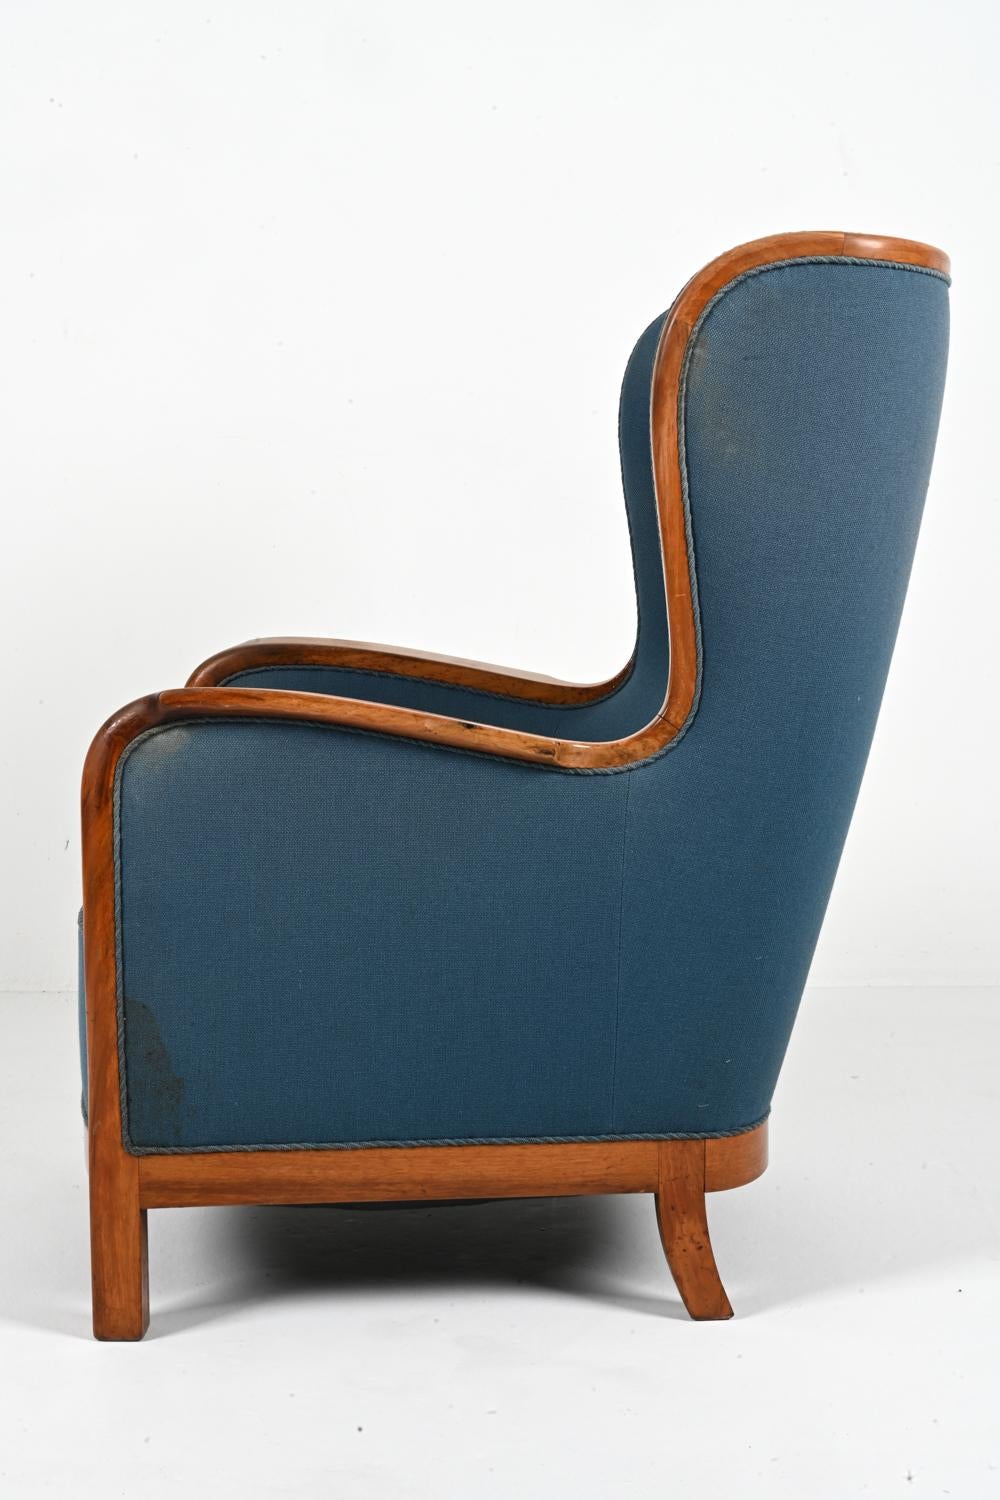 Danish Mahogany Wingback Easy Chair by Frits Henningsen, c. 1940's For Sale 2